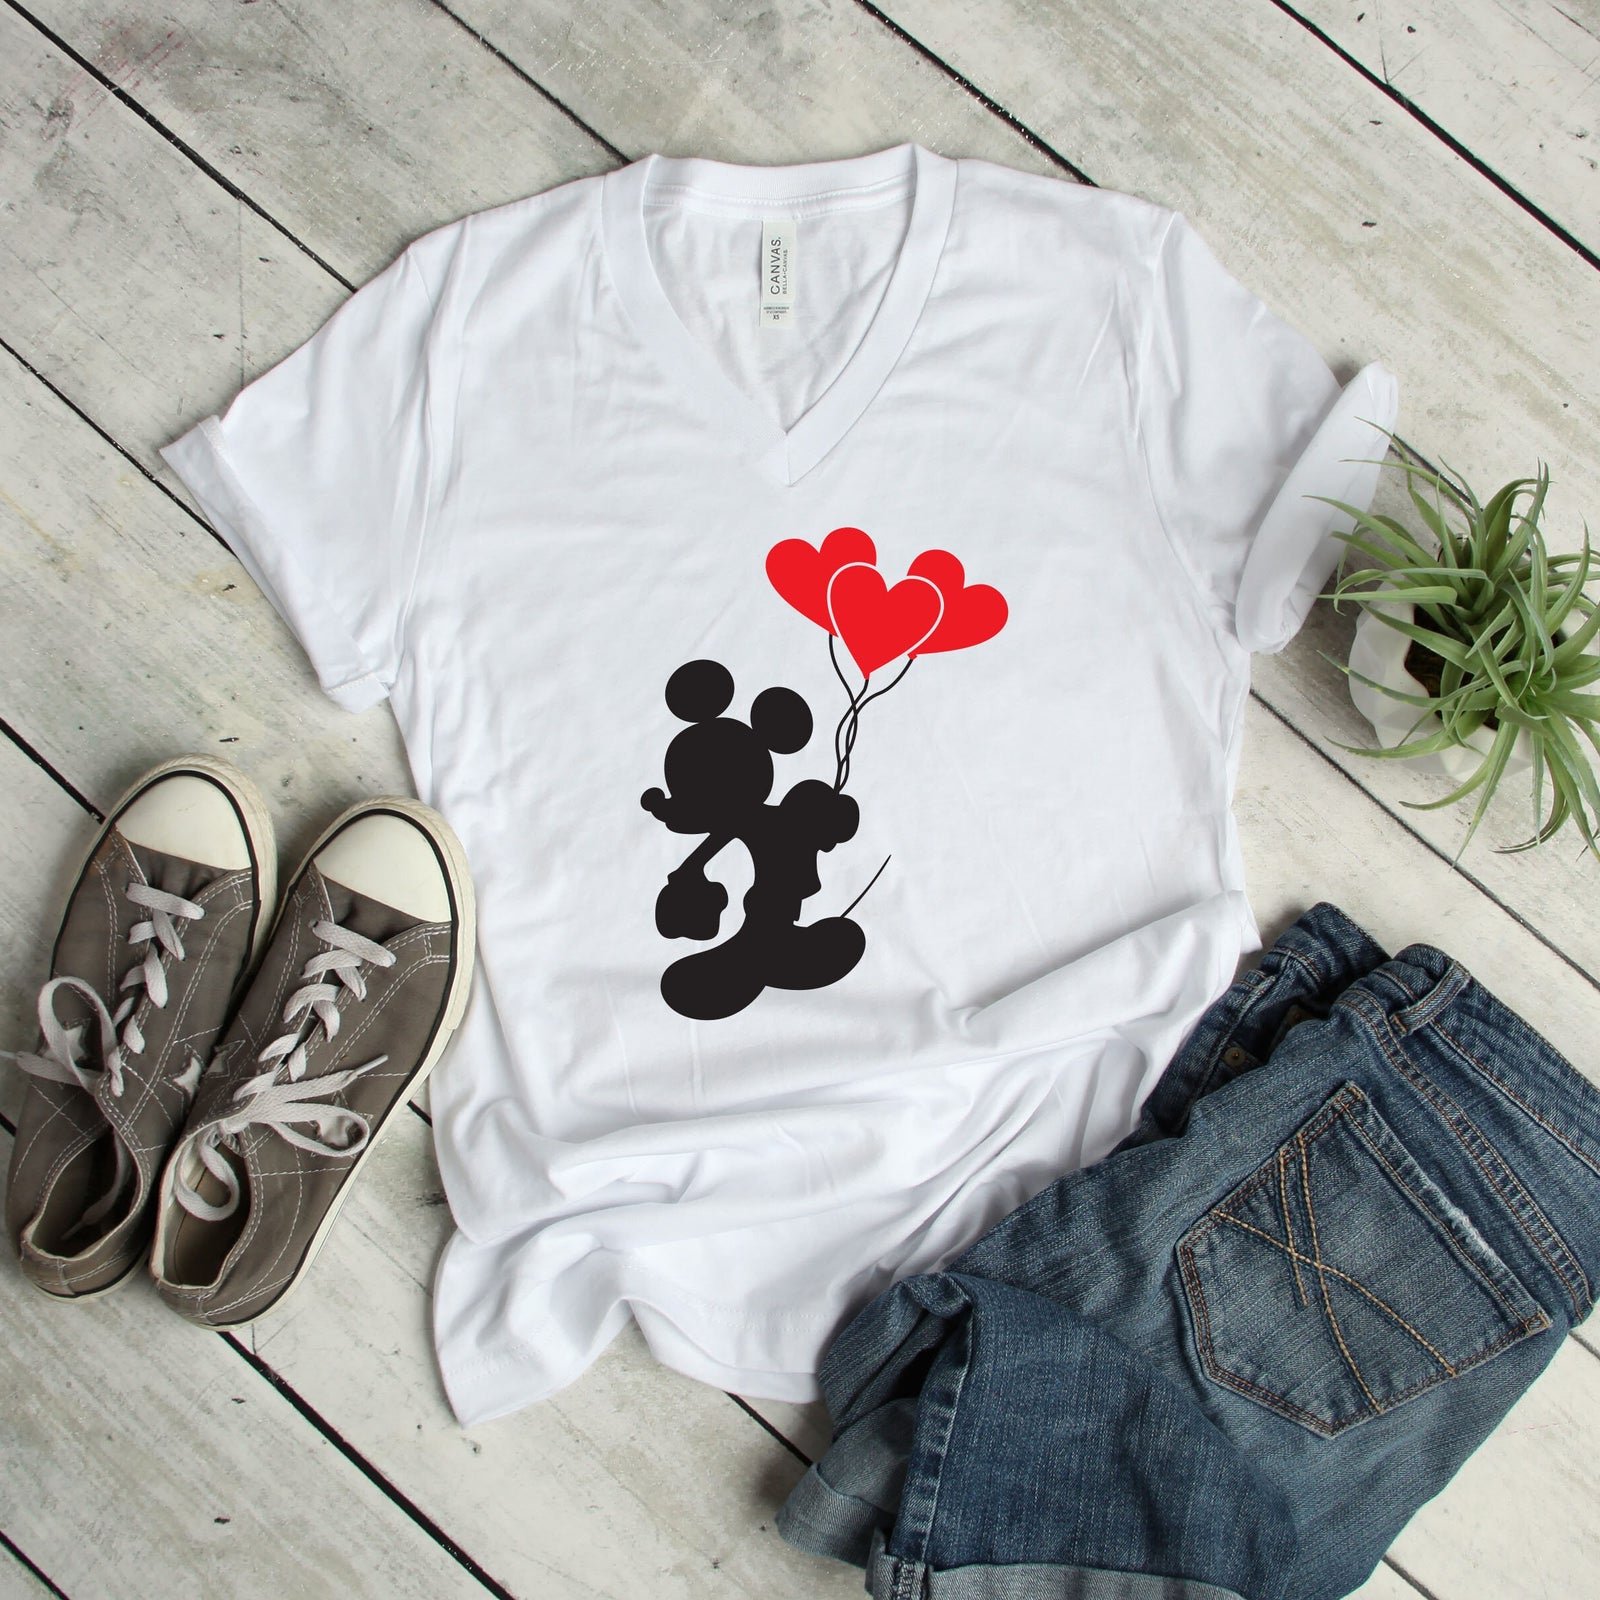 Mickey holding Heart Balloons t shirt - Disney Trip Matching Shirts - Mickey Mouse T Shirt - Mickey Valentines Day